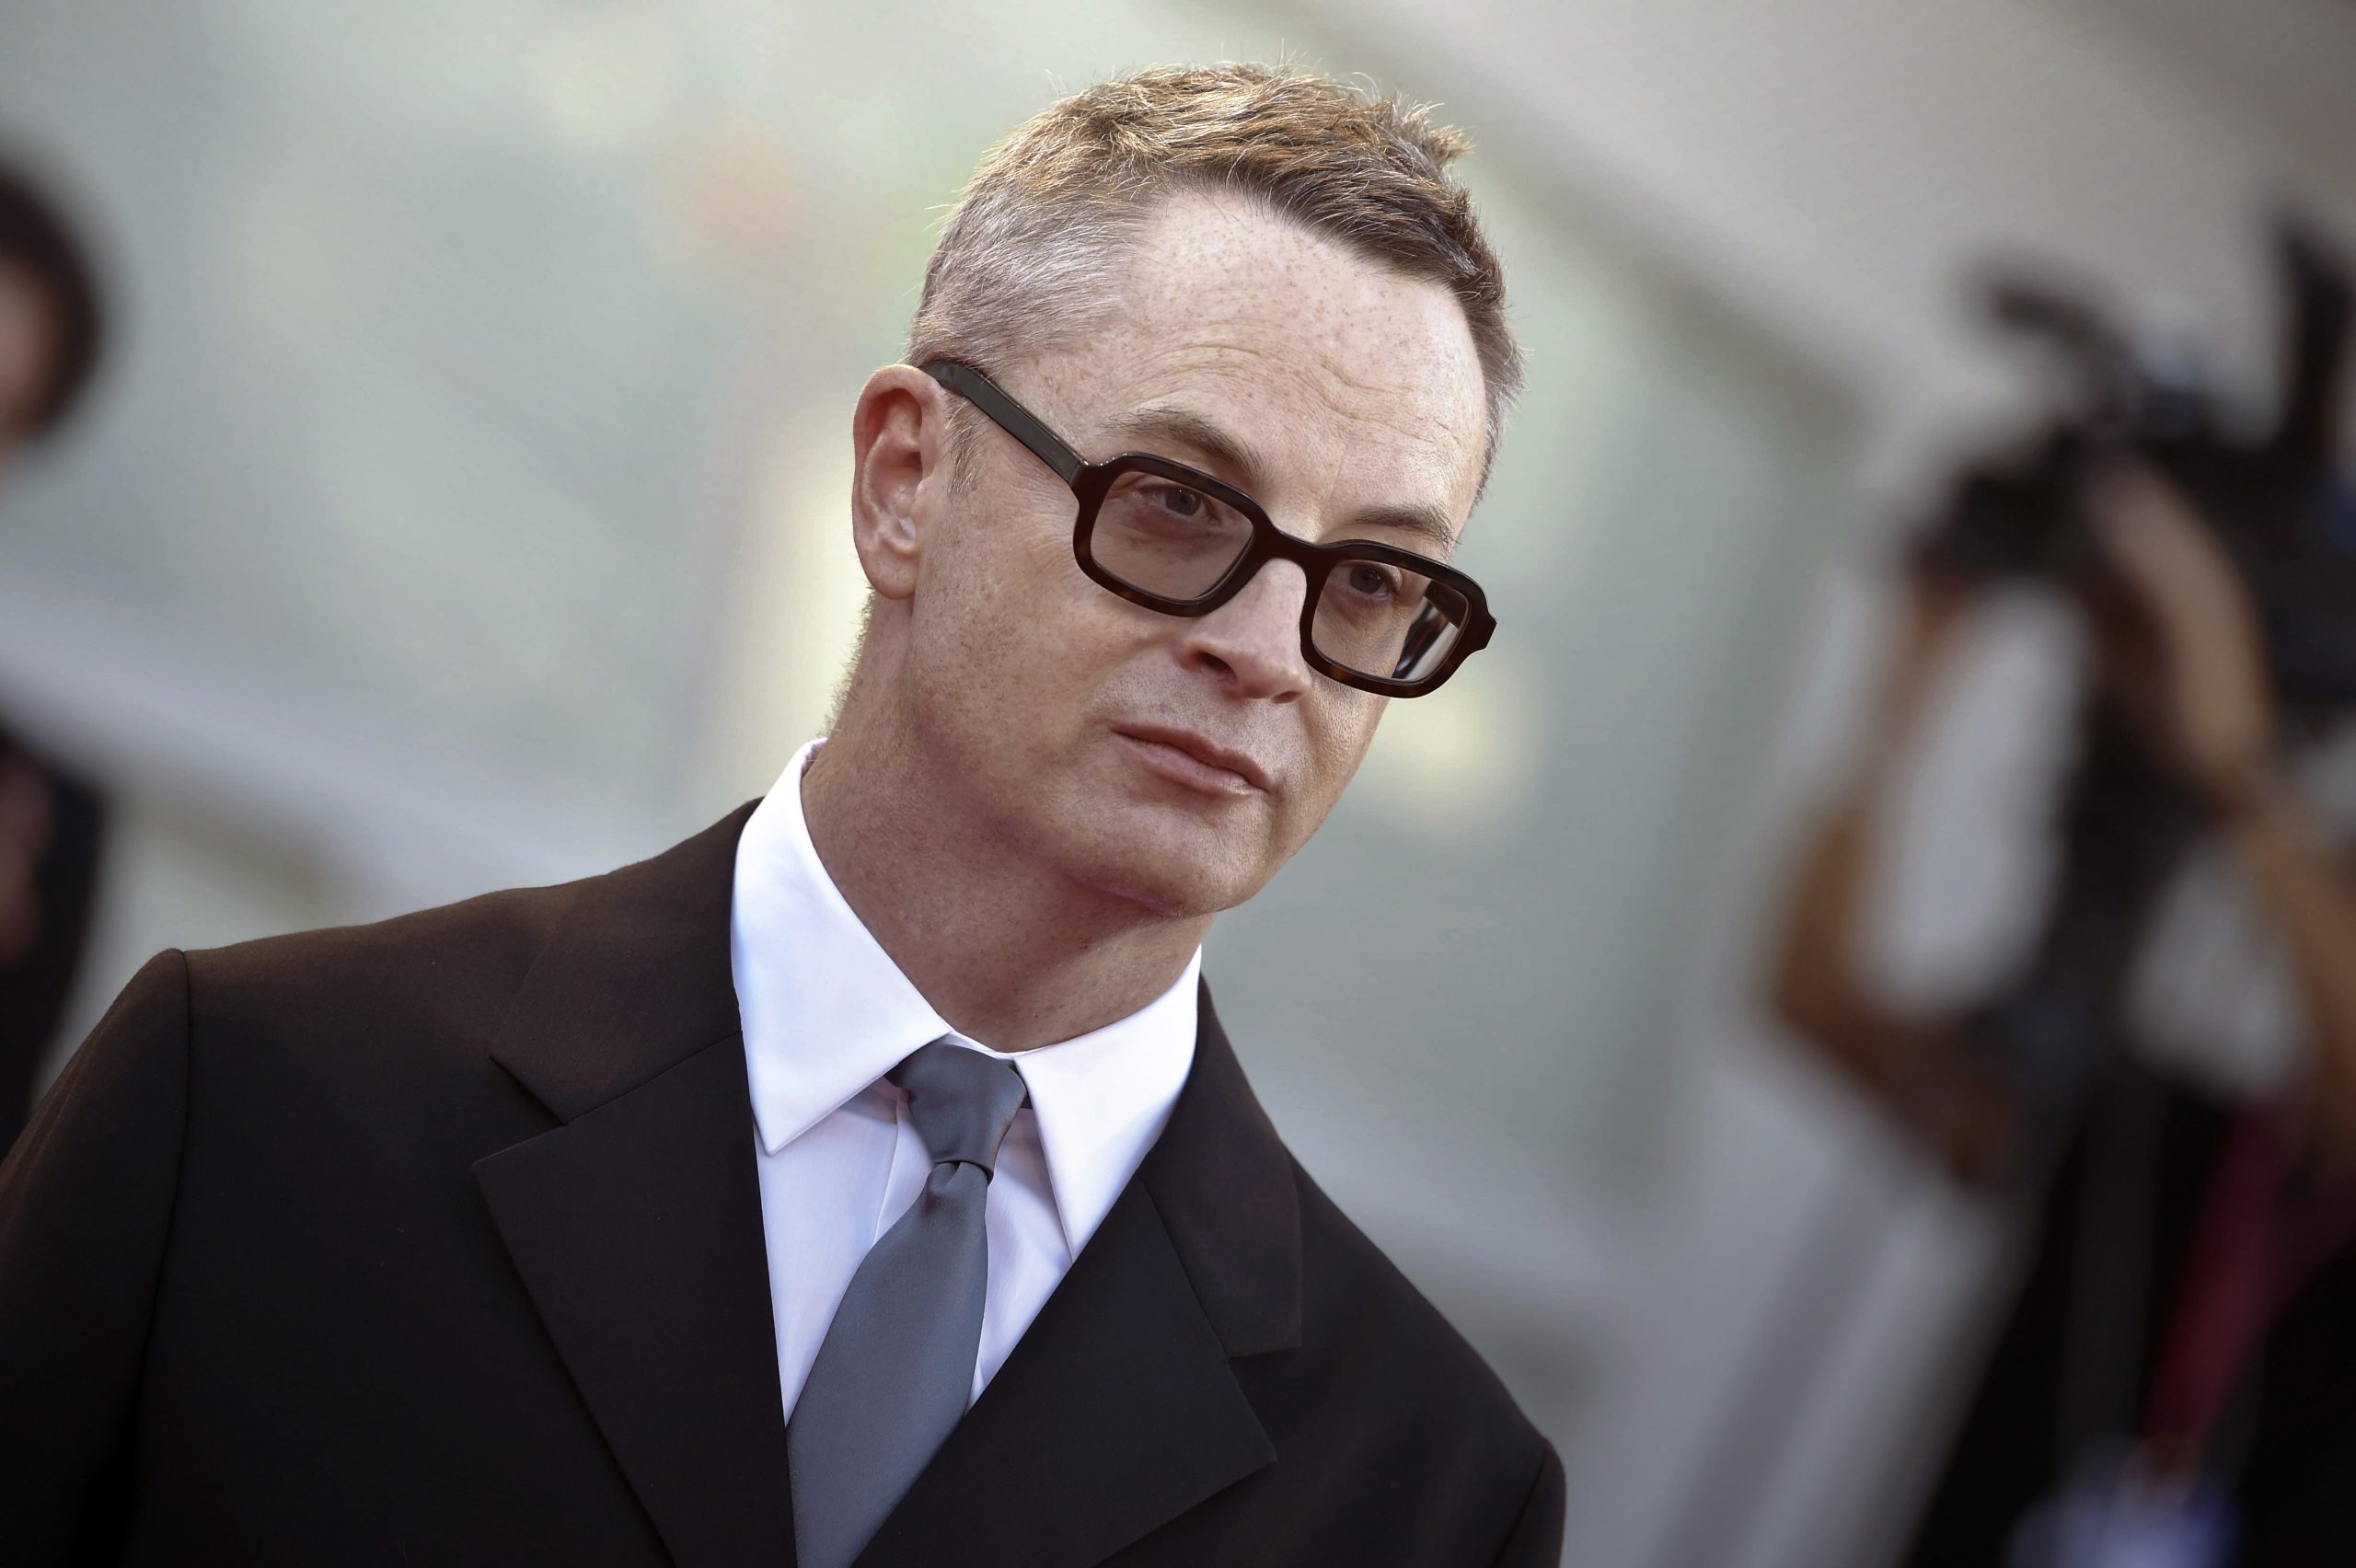 Nicolas Winding Refn Says Audiences Have to ‘Fight for’ Cinema: Streamers Are ‘Rotten with Money and Cocaine’